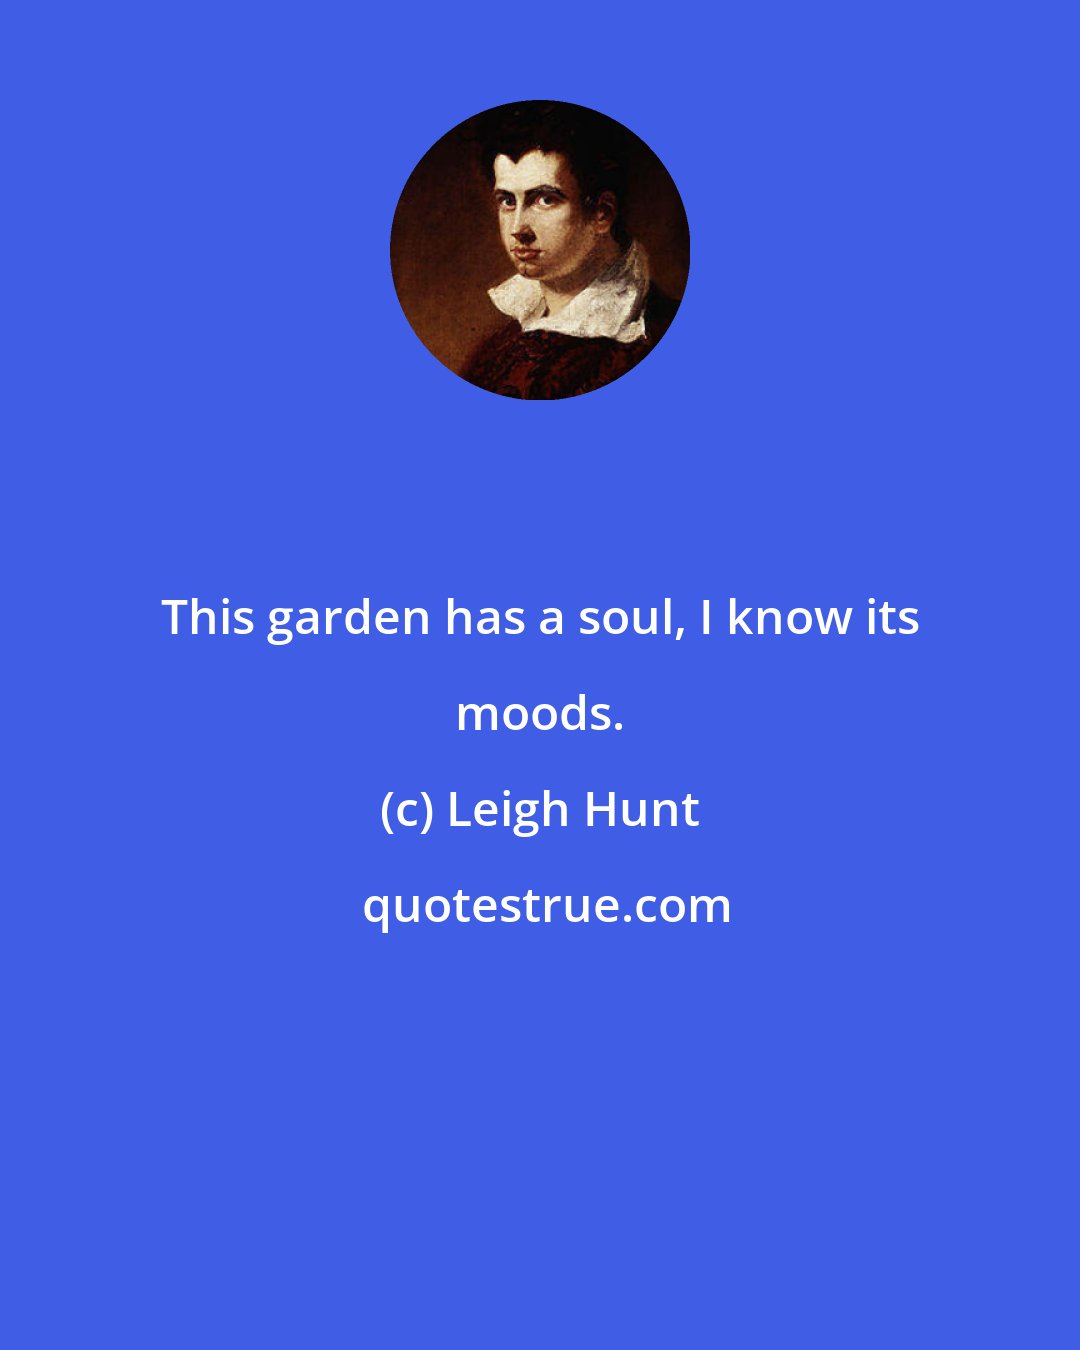 Leigh Hunt: This garden has a soul, I know its moods.